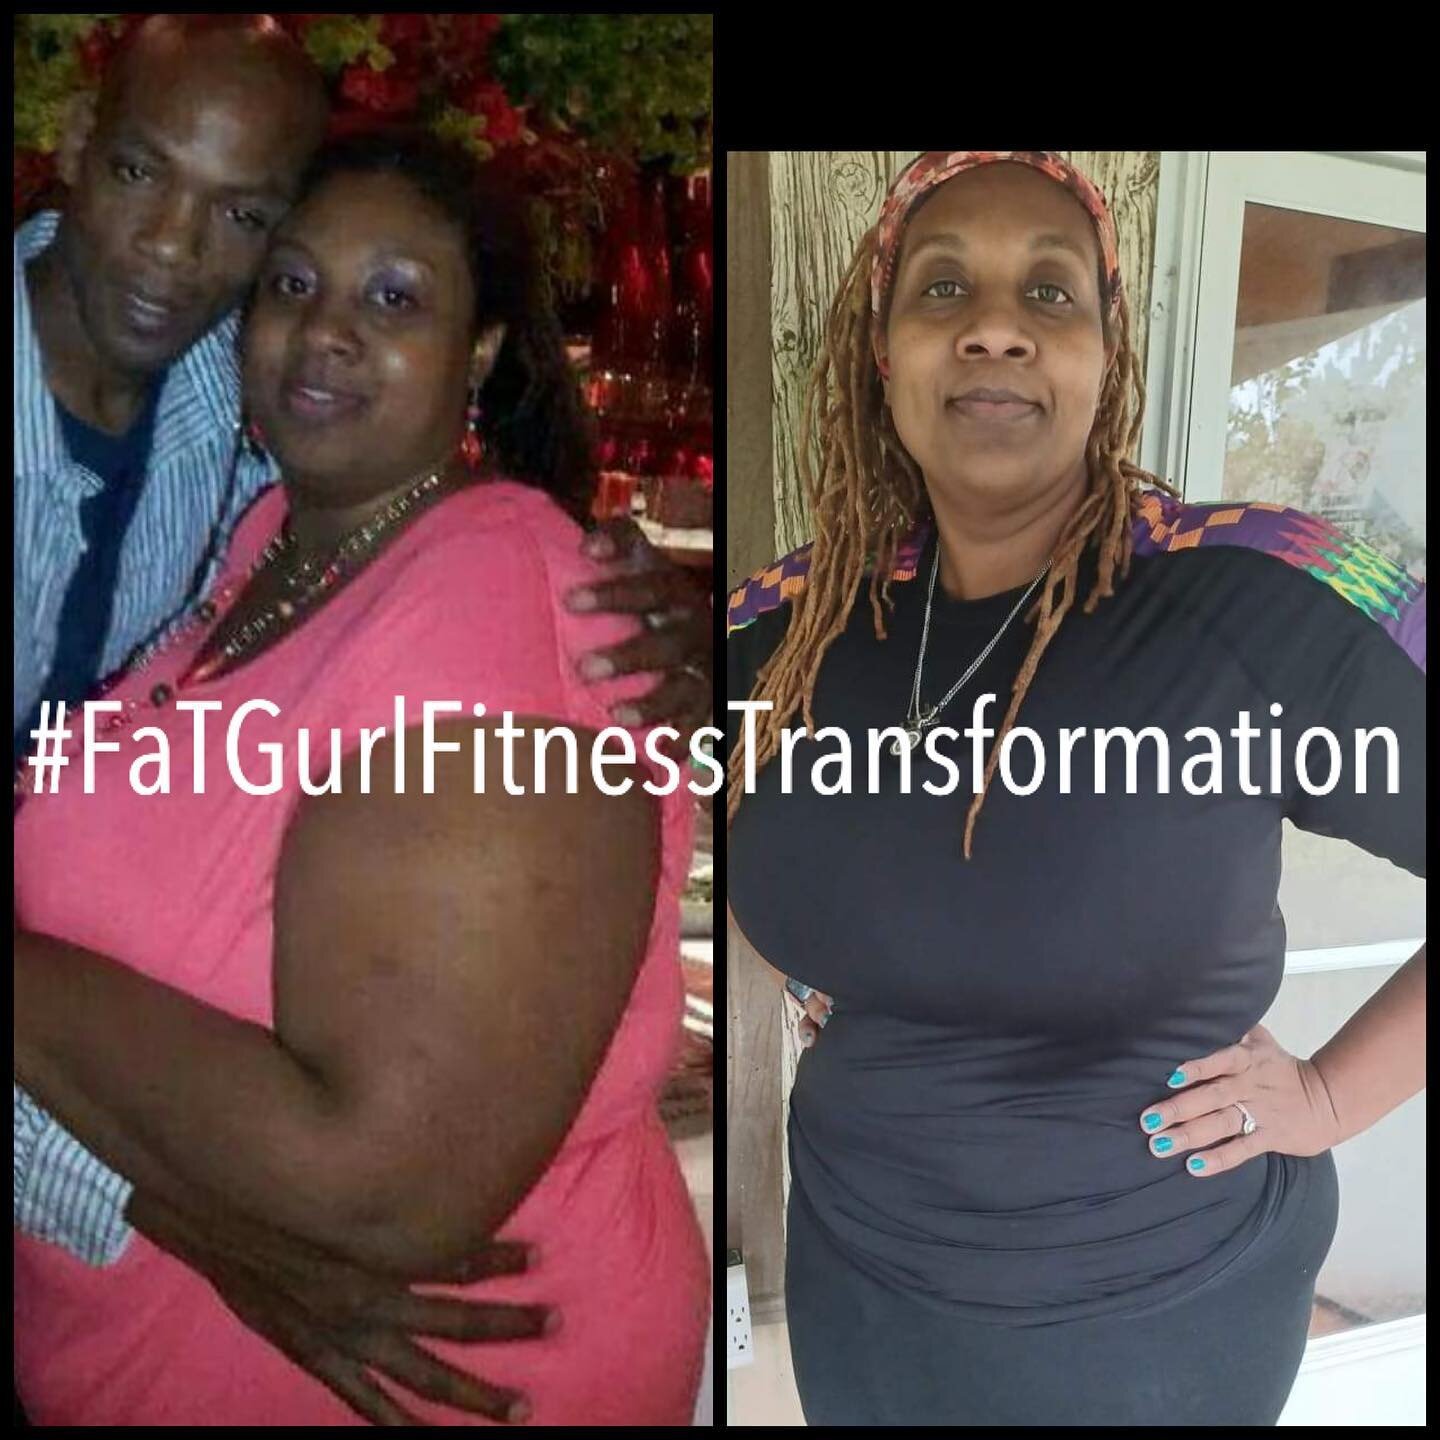 This is Safiyaa! She is F.a.T (Focused and Transforming) Her story is amazing. #fatgurlfitness #weightlossjourney #weightloss #obesity #naturalweightloss #nevergiveup #transformationtuesday read her story in her own words in the comments.